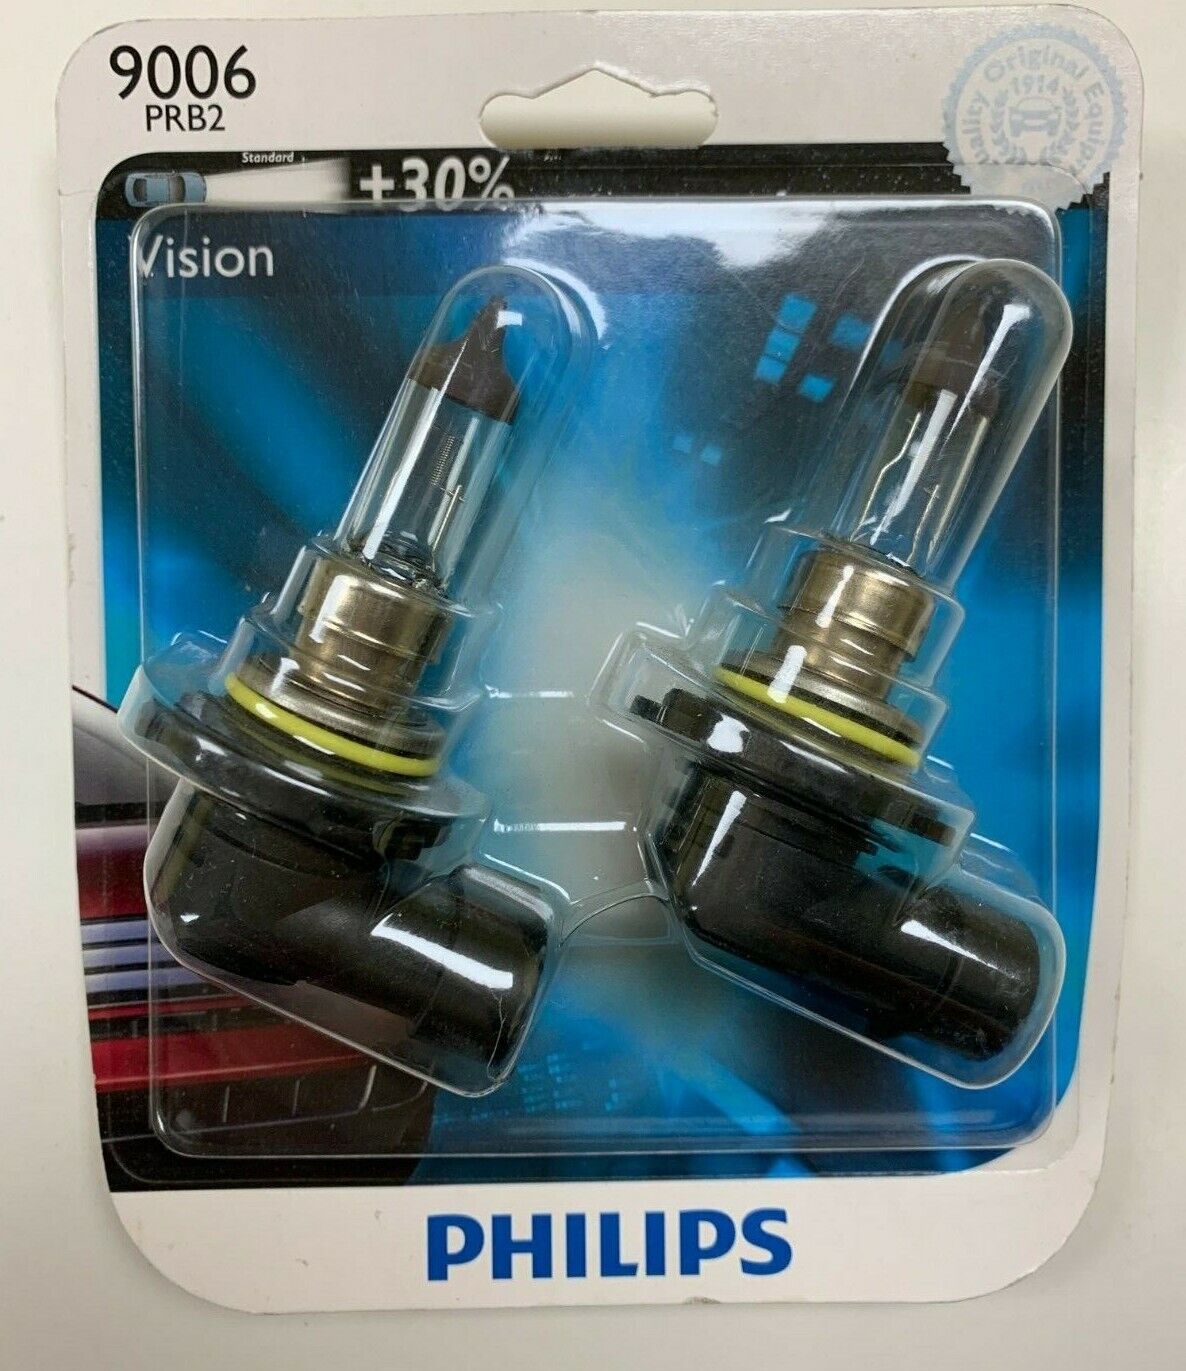 2x Philips 9006 PRB2  Super Bright 30% More Vision Light Bulb Lamp GERMANY BEAM